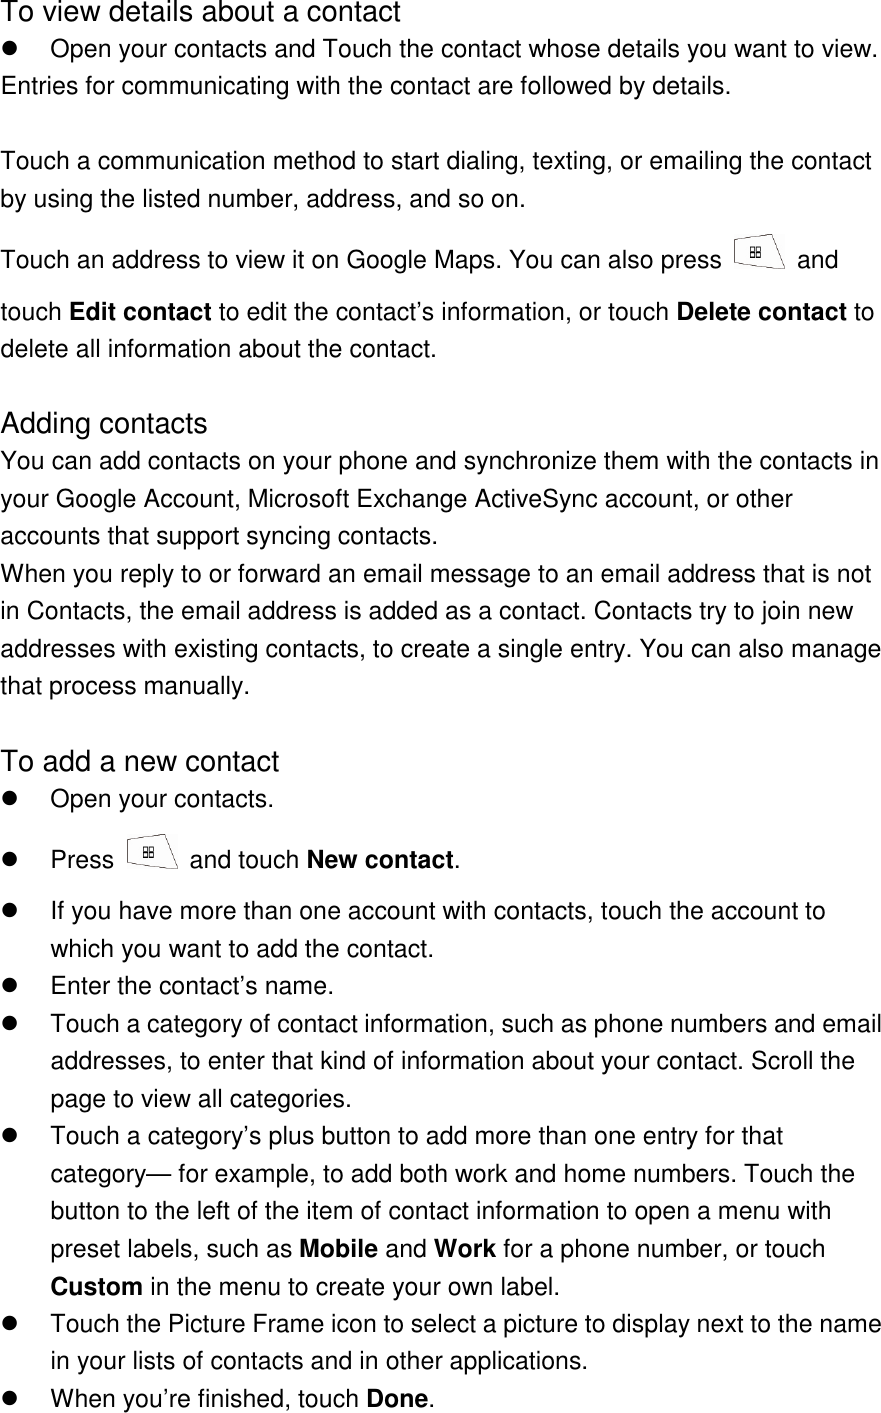 To view details about a contact   Open your contacts and Touch the contact whose details you want to view. Entries for communicating with the contact are followed by details.  Touch a communication method to start dialing, texting, or emailing the contact by using the listed number, address, and so on. Touch an address to view it on Google Maps. You can also press   and touch Edit contact to edit the contact’s information, or touch Delete contact to delete all information about the contact.  Adding contacts You can add contacts on your phone and synchronize them with the contacts in your Google Account, Microsoft Exchange ActiveSync account, or other accounts that support syncing contacts. When you reply to or forward an email message to an email address that is not in Contacts, the email address is added as a contact. Contacts try to join new addresses with existing contacts, to create a single entry. You can also manage that process manually.  To add a new contact   Open your contacts.   Press    and touch New contact.   If you have more than one account with contacts, touch the account to which you want to add the contact.   Enter the contact’s name.   Touch a category of contact information, such as phone numbers and email addresses, to enter that kind of information about your contact. Scroll the page to view all categories.   Touch a category’s plus button to add more than one entry for that category— for example, to add both work and home numbers. Touch the button to the left of the item of contact information to open a menu with preset labels, such as Mobile and Work for a phone number, or touch Custom in the menu to create your own label.   Touch the Picture Frame icon to select a picture to display next to the name in your lists of contacts and in other applications.   When you’re finished, touch Done. 